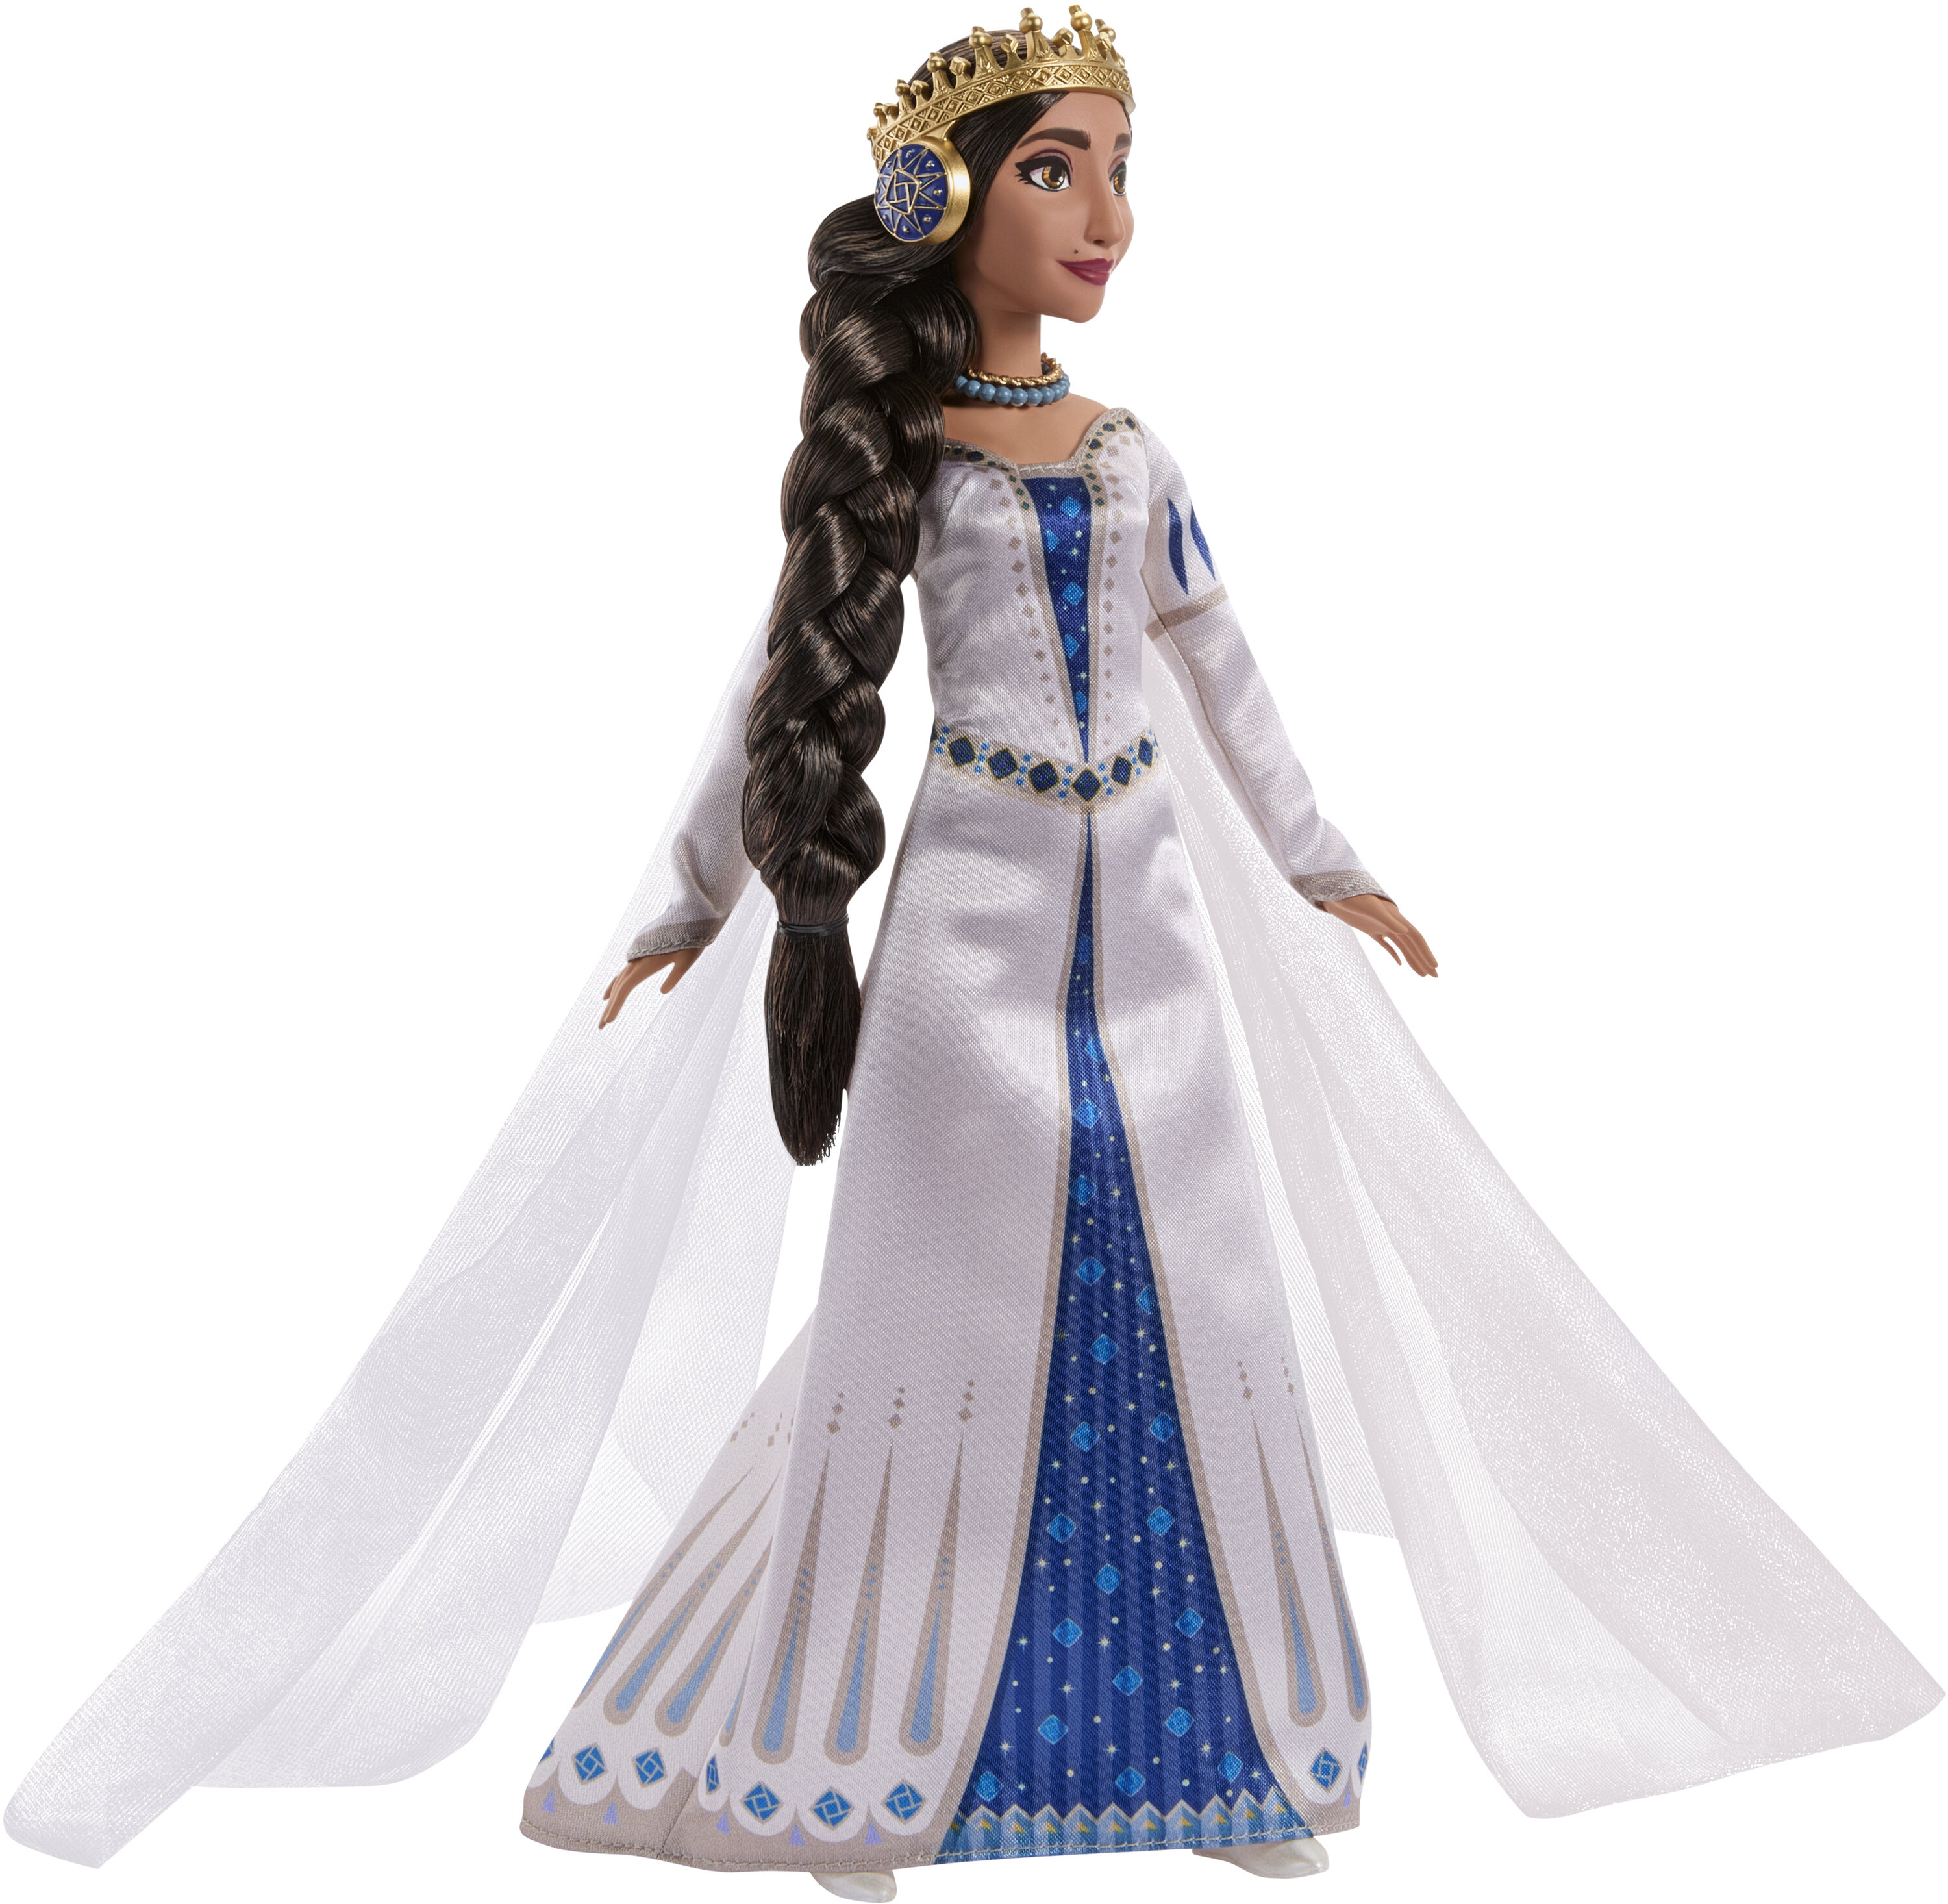 Disney Wish Queen Amaya of Rosas 11 inch Fashion Doll, Posable Doll & Accessories - image 4 of 7